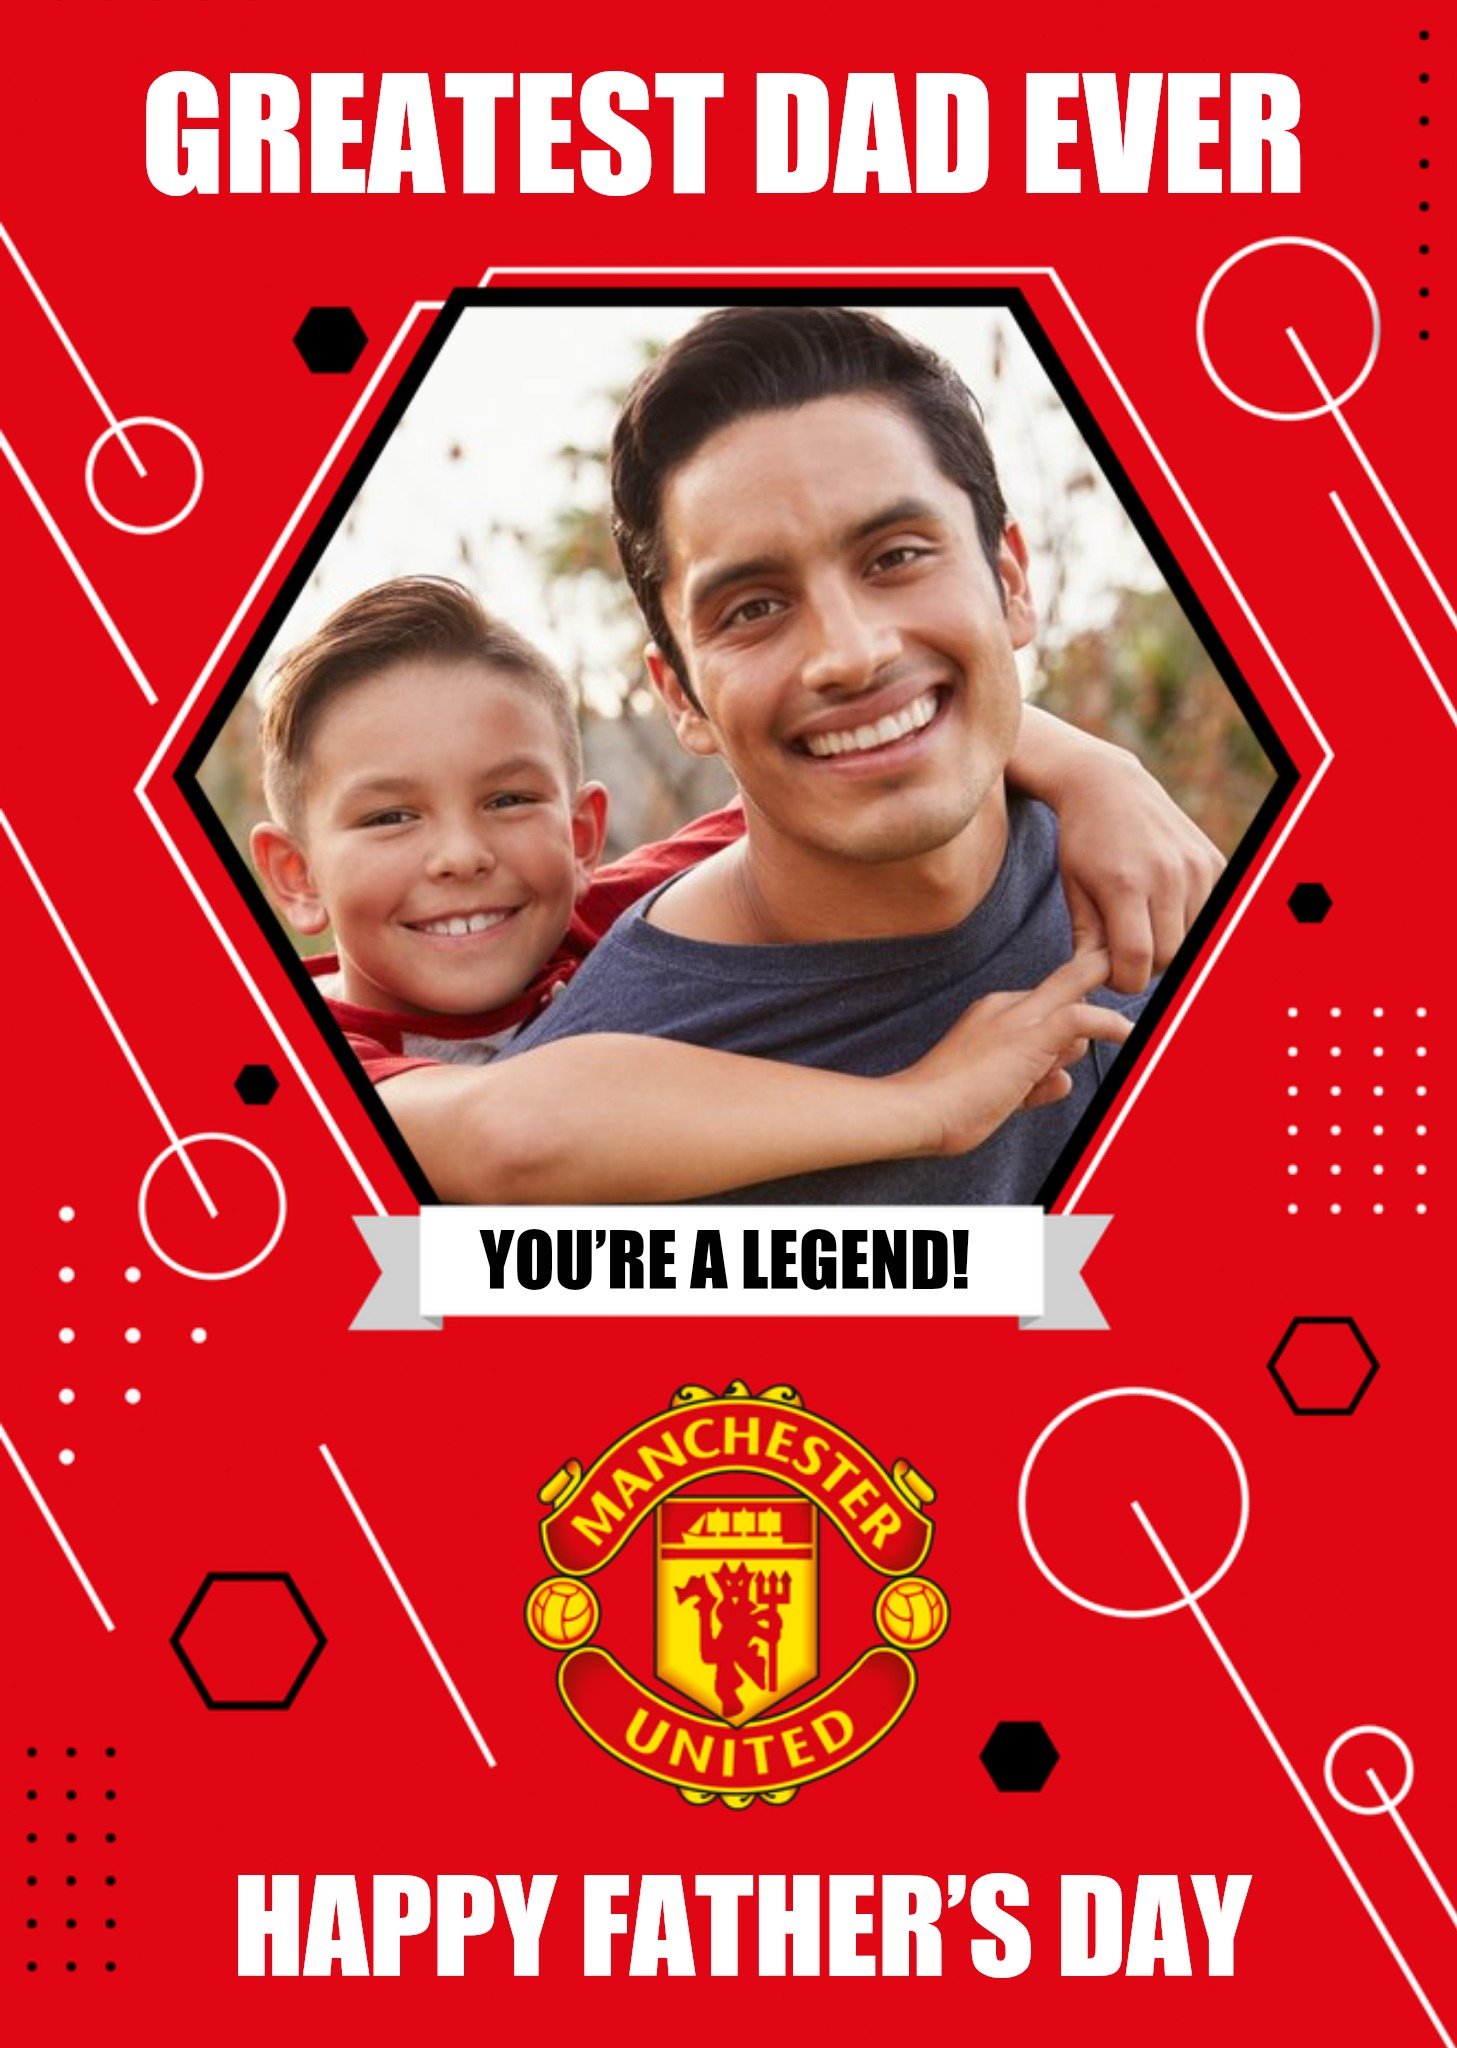 Manchester United Fc Football Legend Greatest Dad Ever Photo Upload Fathers Day Card Ecard